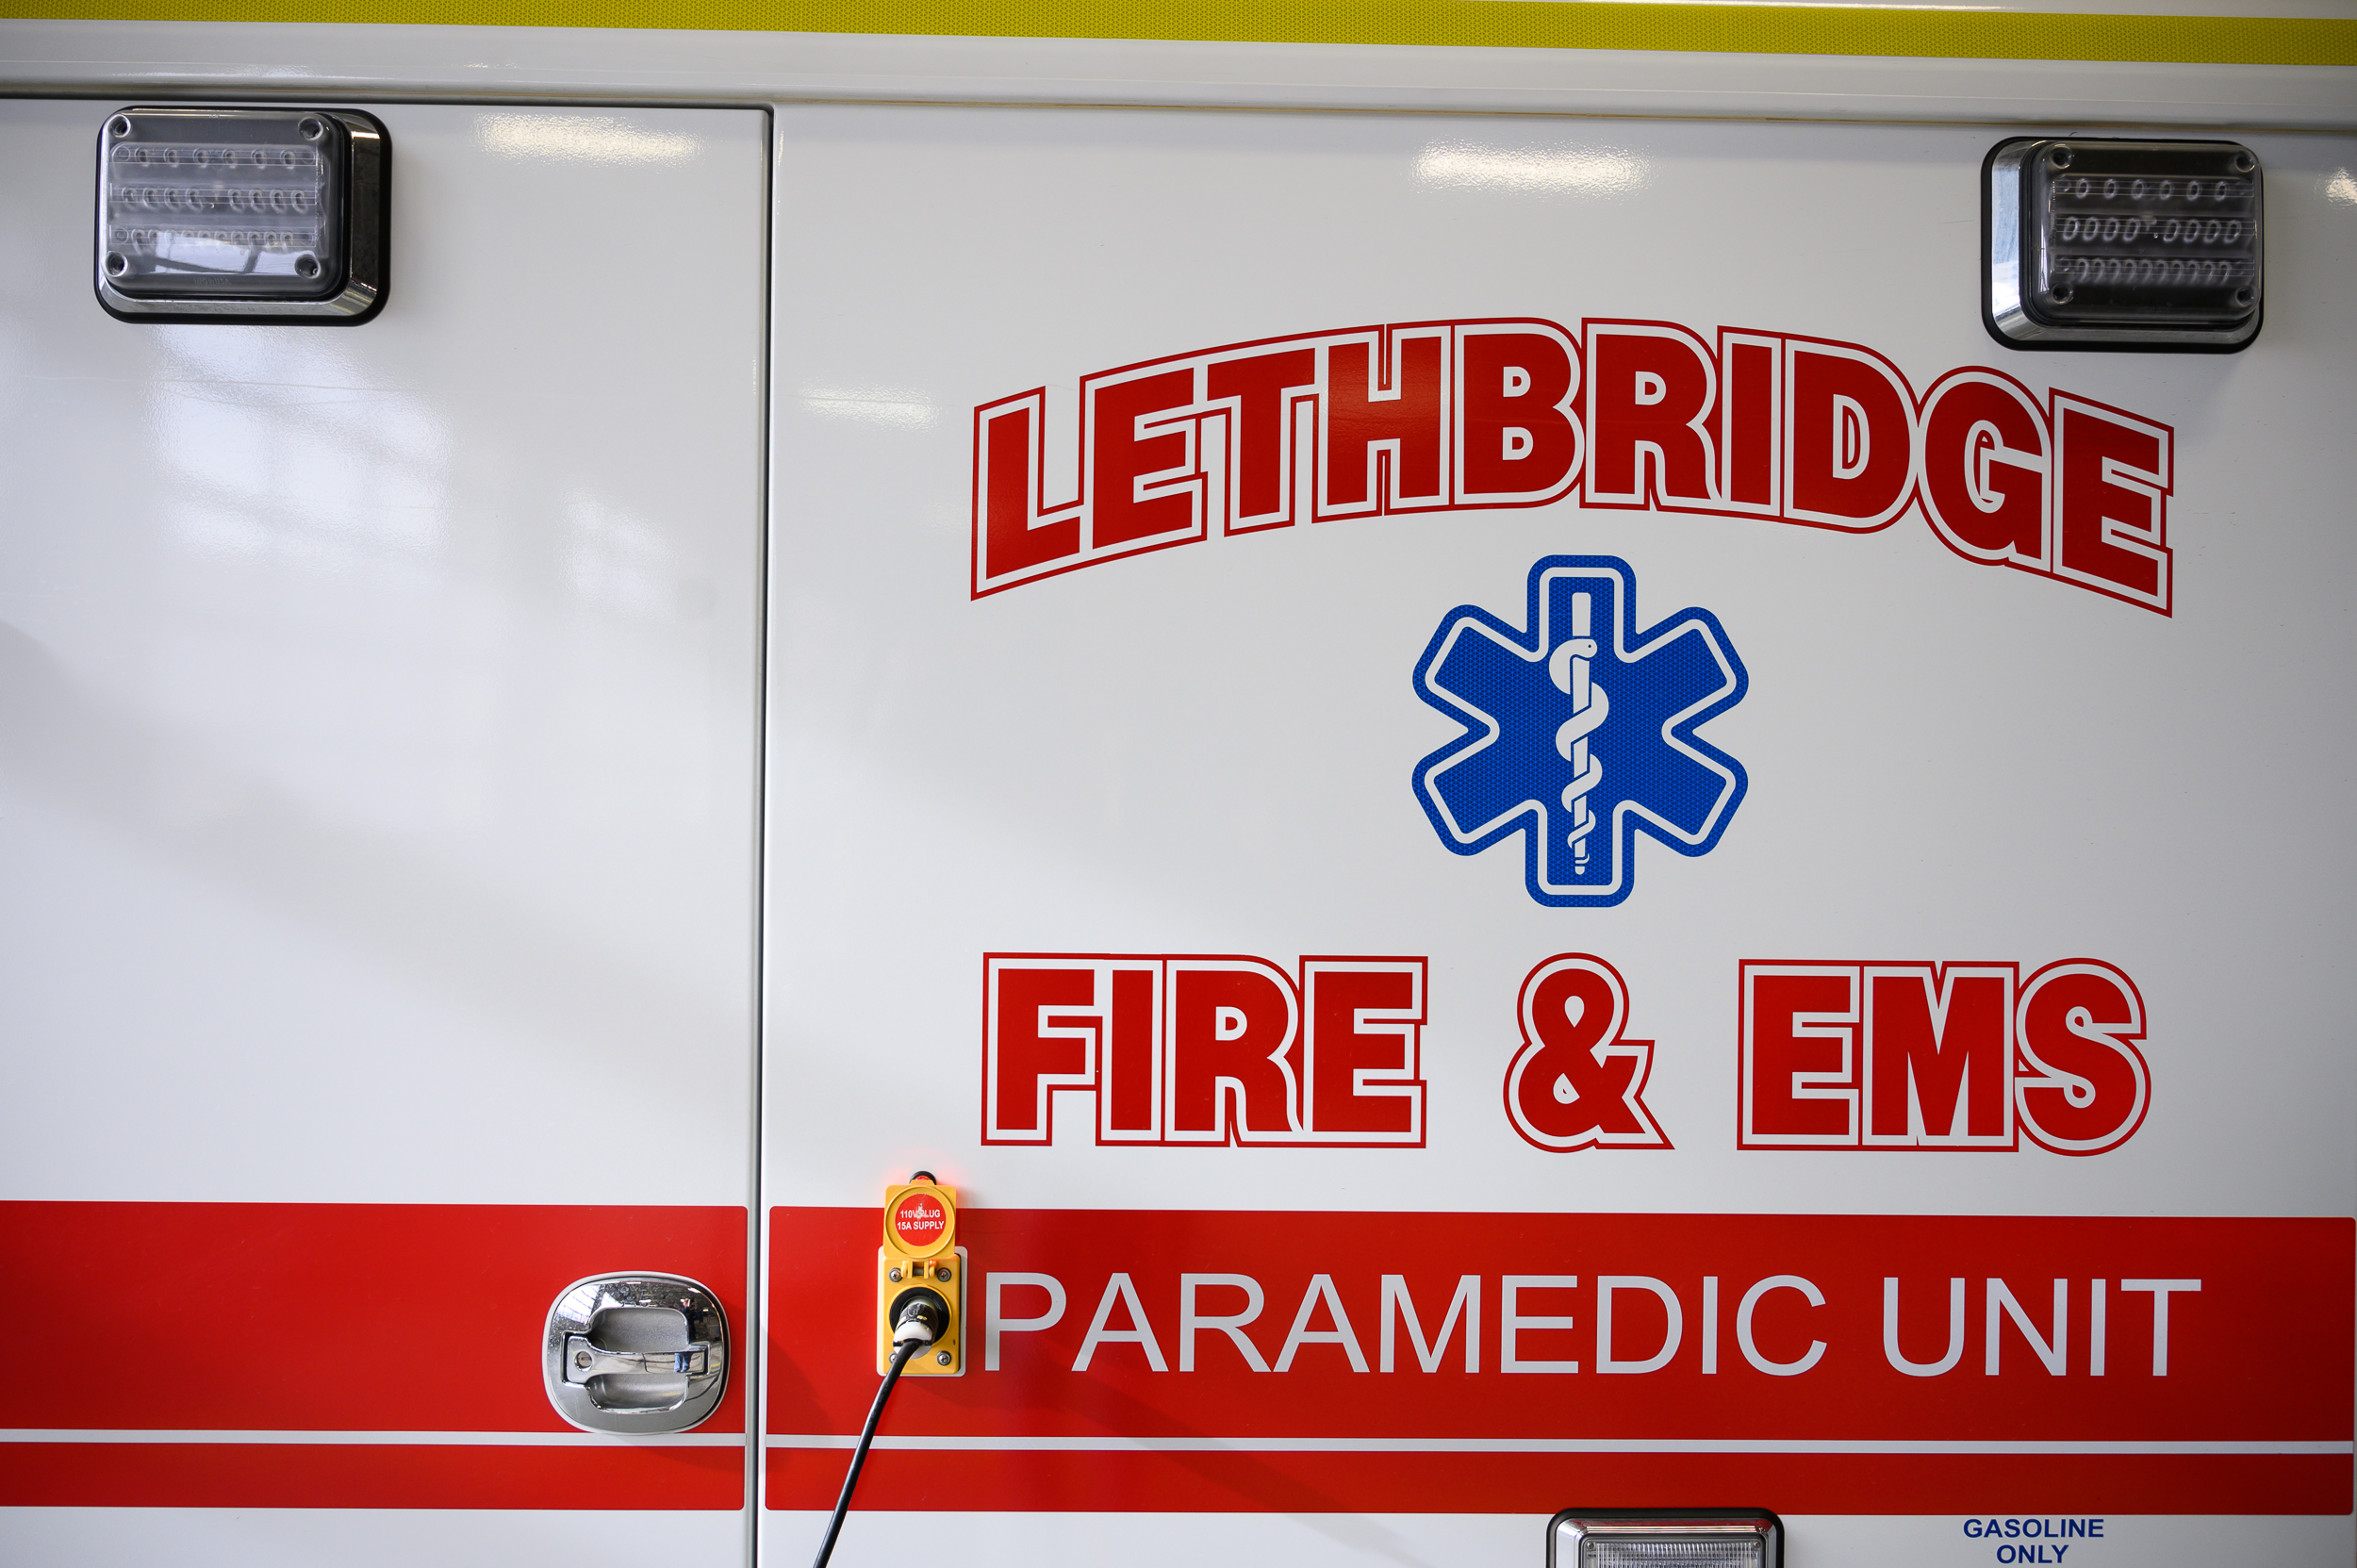 Image of It’s an A+ for Lethbridge Fire & Emergency Services